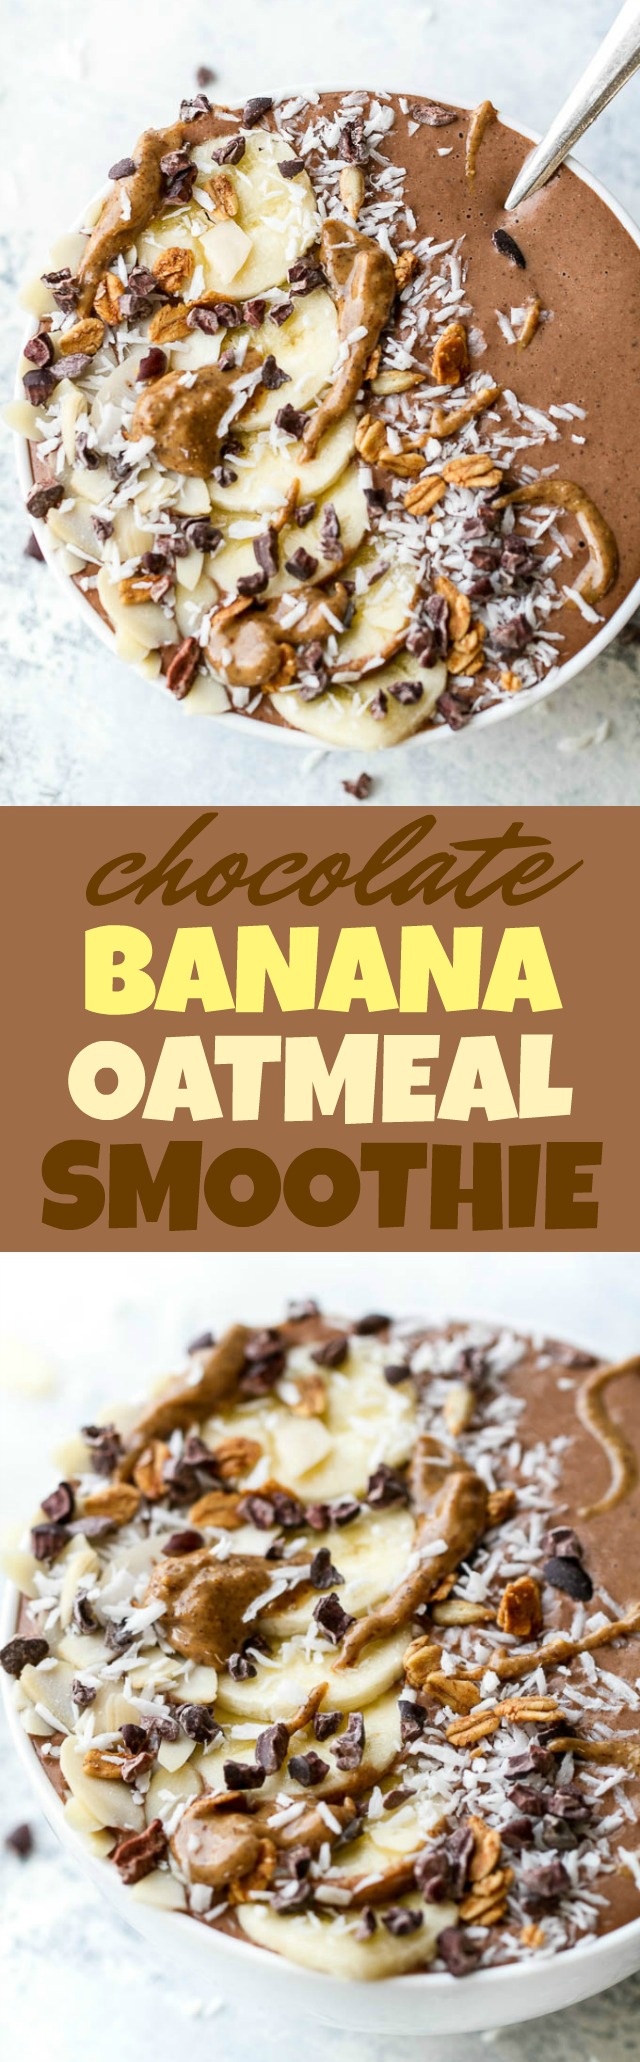 This creamy Chocolate Banana Oatmeal Smoothie Bowl has that stick-to-your-ribs feeling of a bowl of oats and will keep you satisfied for hours with plenty of fiber, plant-based protein, and healthy fat. The perfect vegan and gluten-free breakfast or snack! | runningwithspoons.com